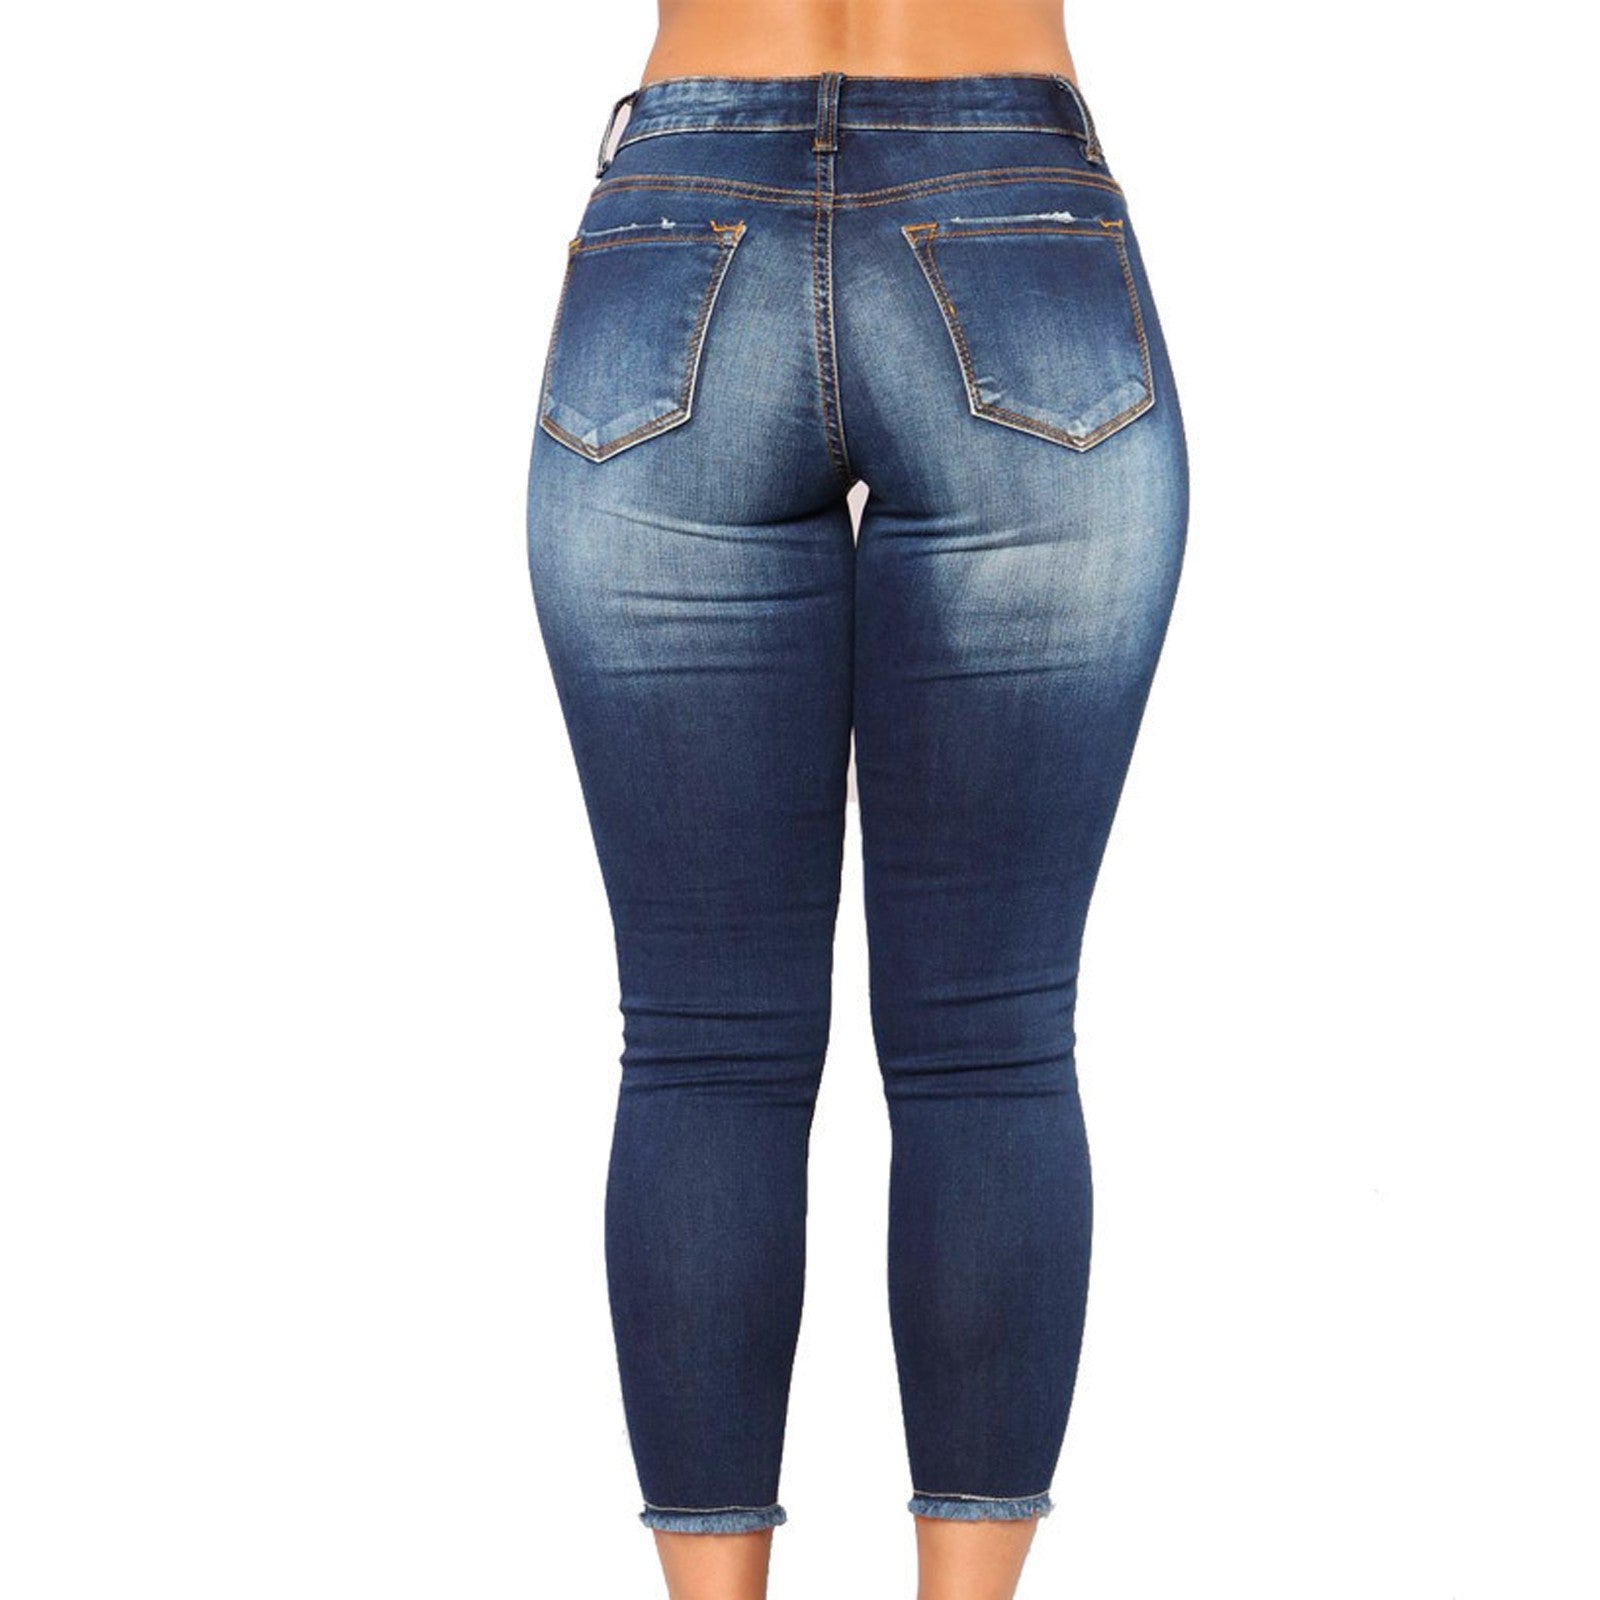 Women's High-waist Stretch Ripped Spring Festival Jeans